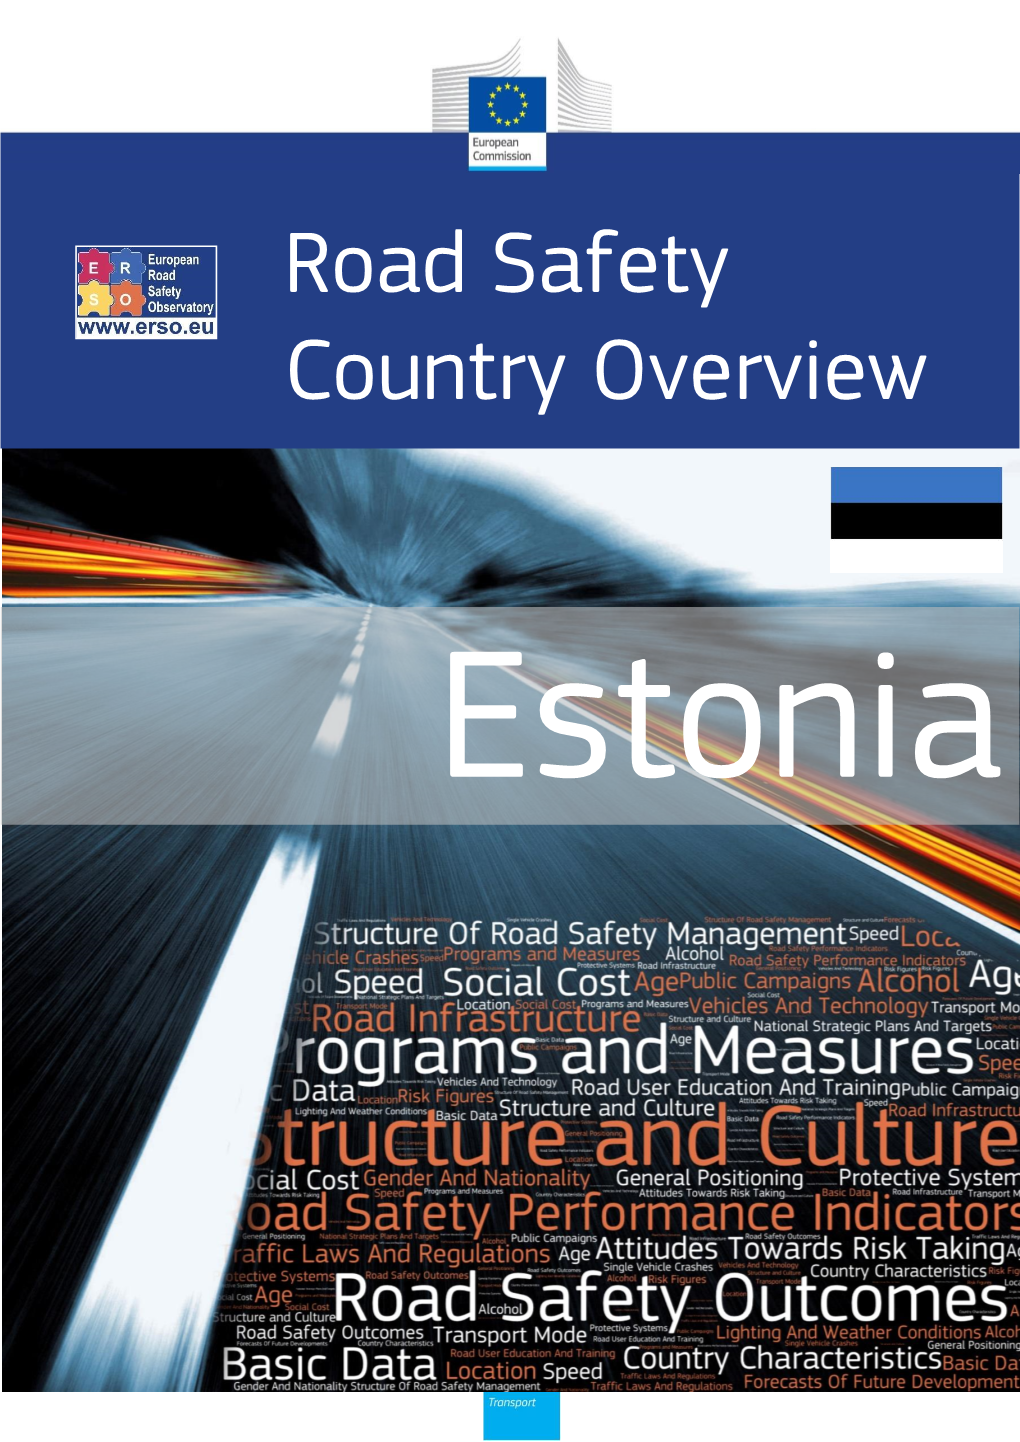 Road Safety Country Overview – Estonia